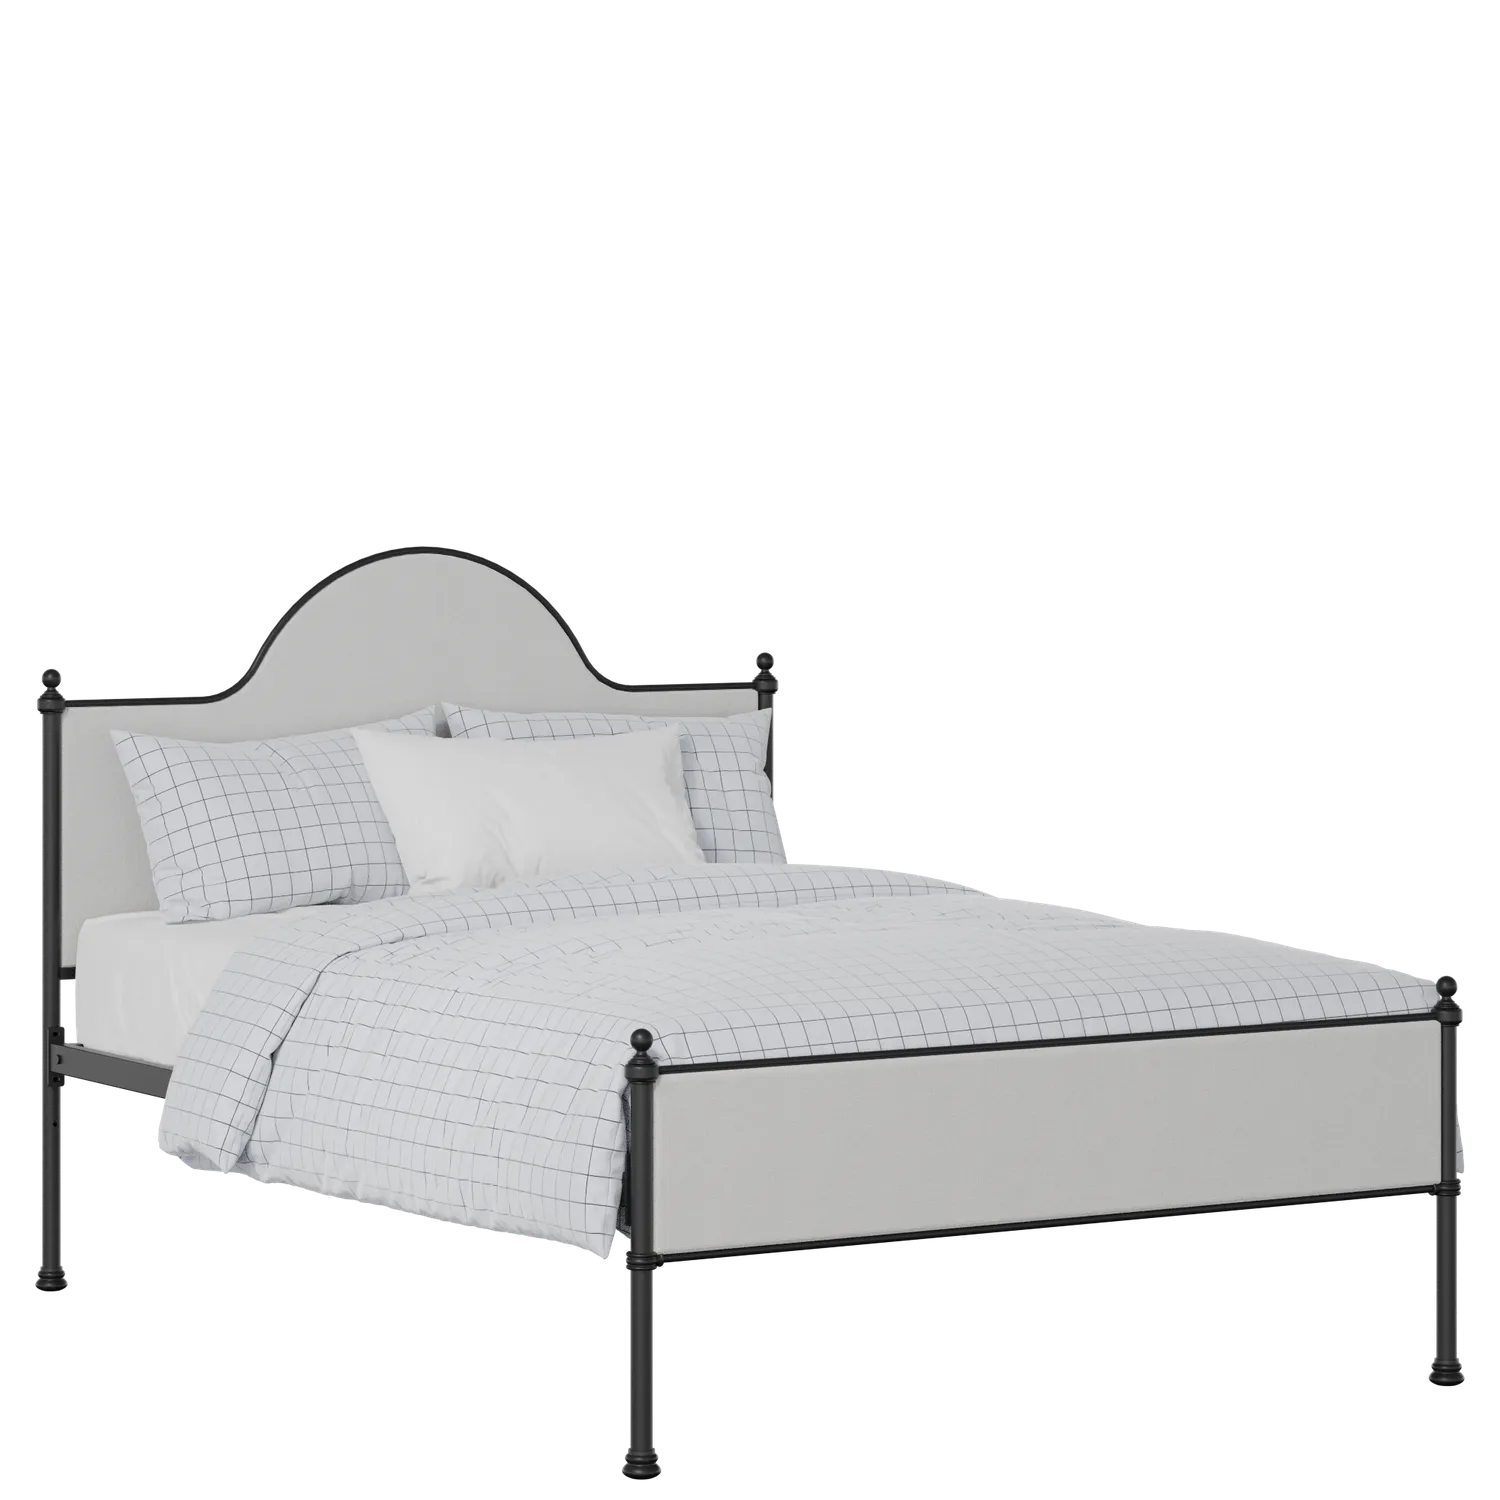 Albert Slim iron/metal upholstered bed in black with silver fabric